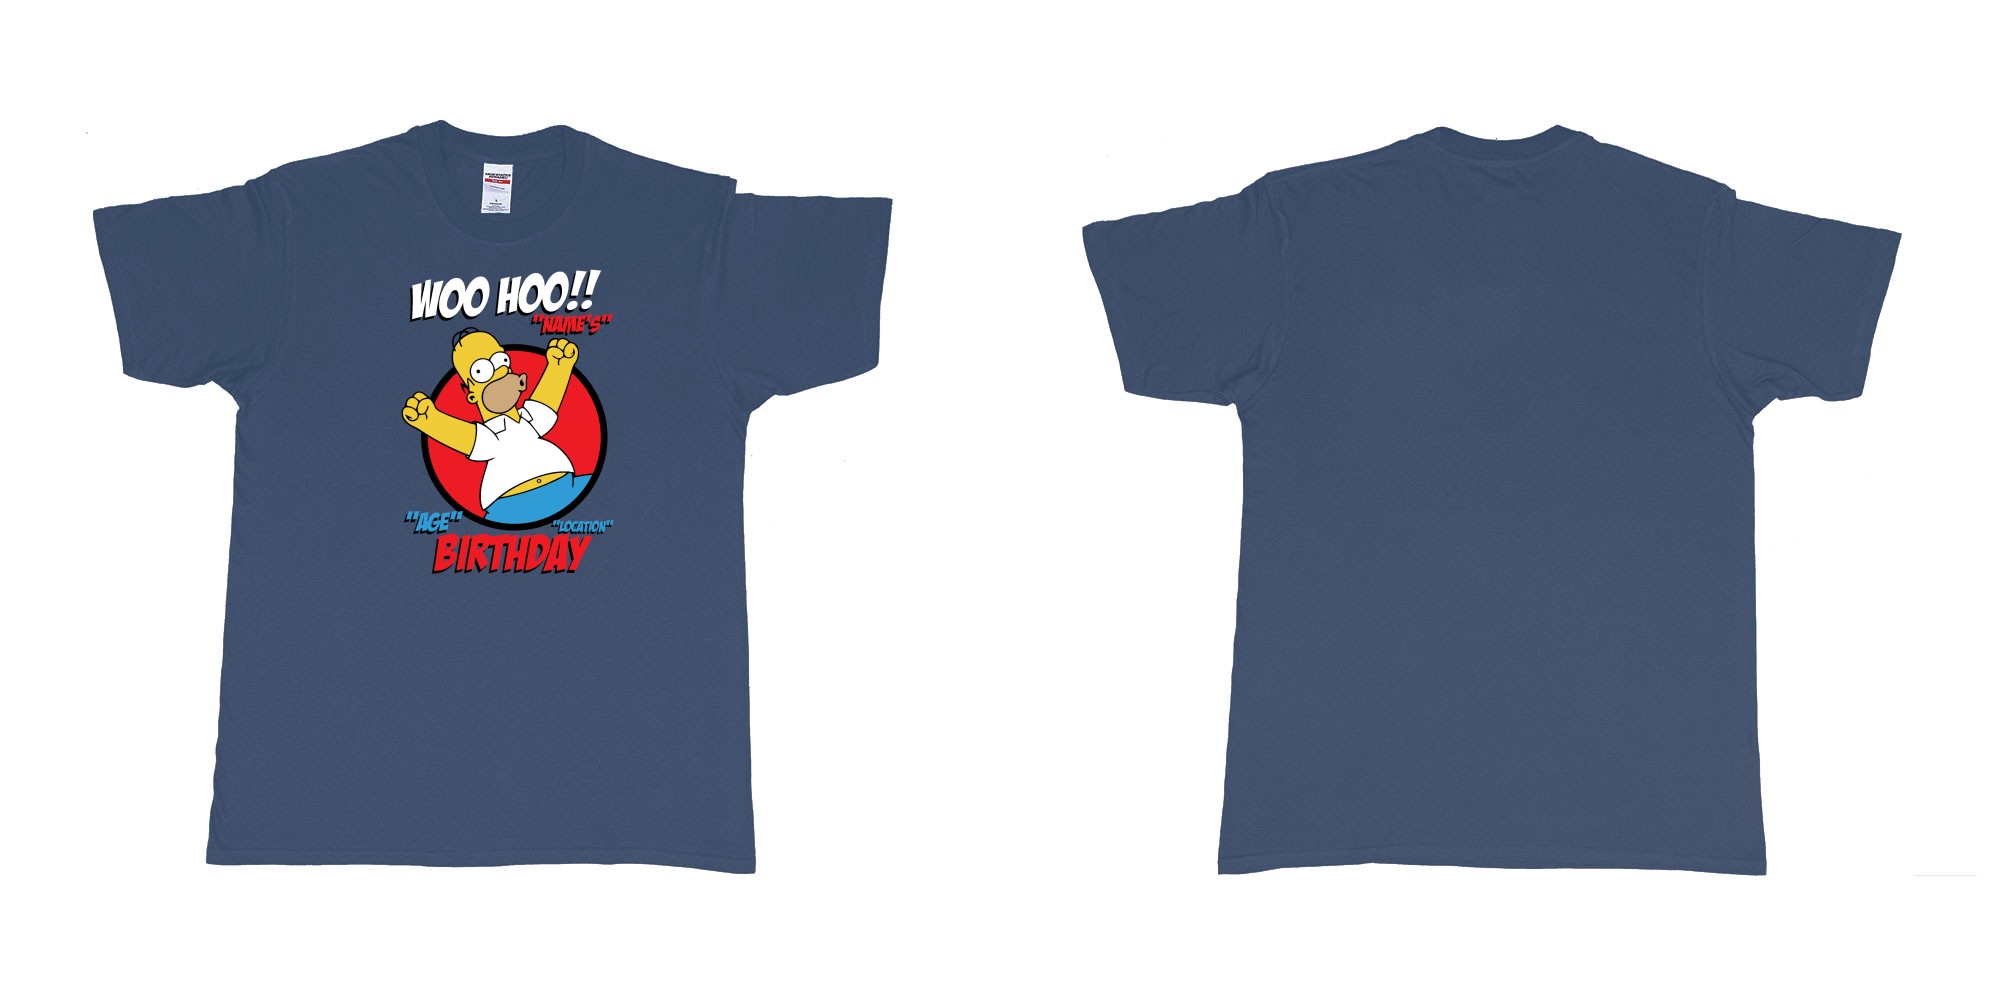 Custom tshirt design homer simpson woo hoo custom age name birthday in fabric color navy choice your own text made in Bali by The Pirate Way